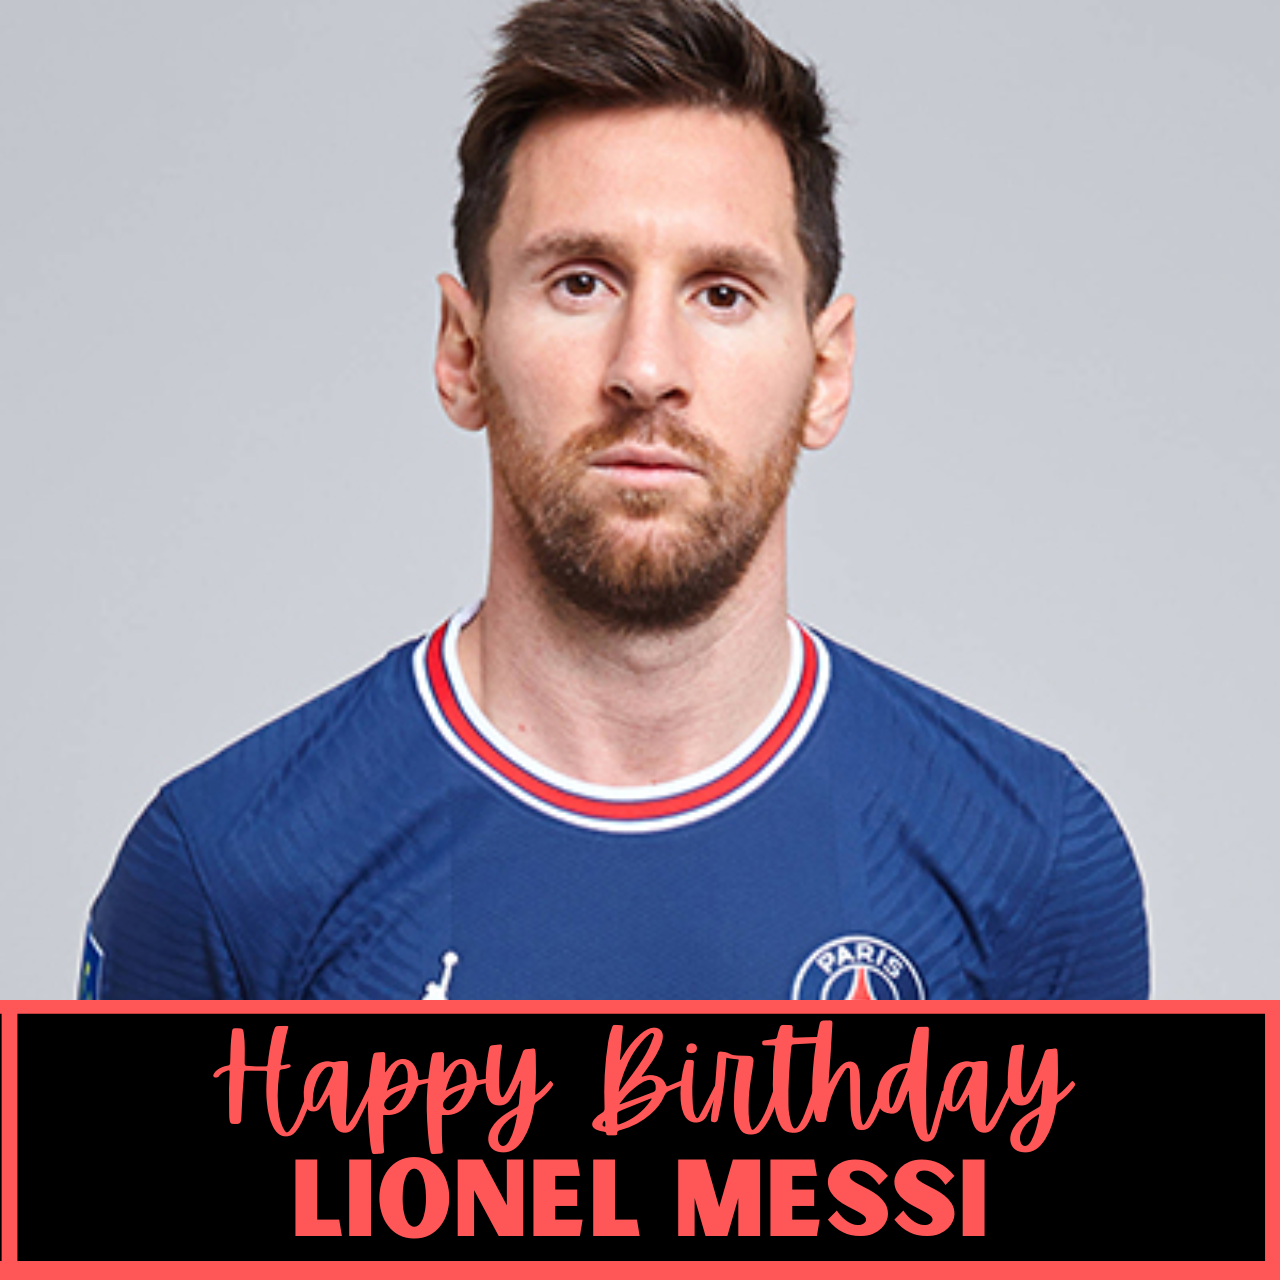 Happy Birthday Lionel Messi: Best Wishes, Quotes, Images, Messages, Greetings, Posters To Greet Soccer Legend